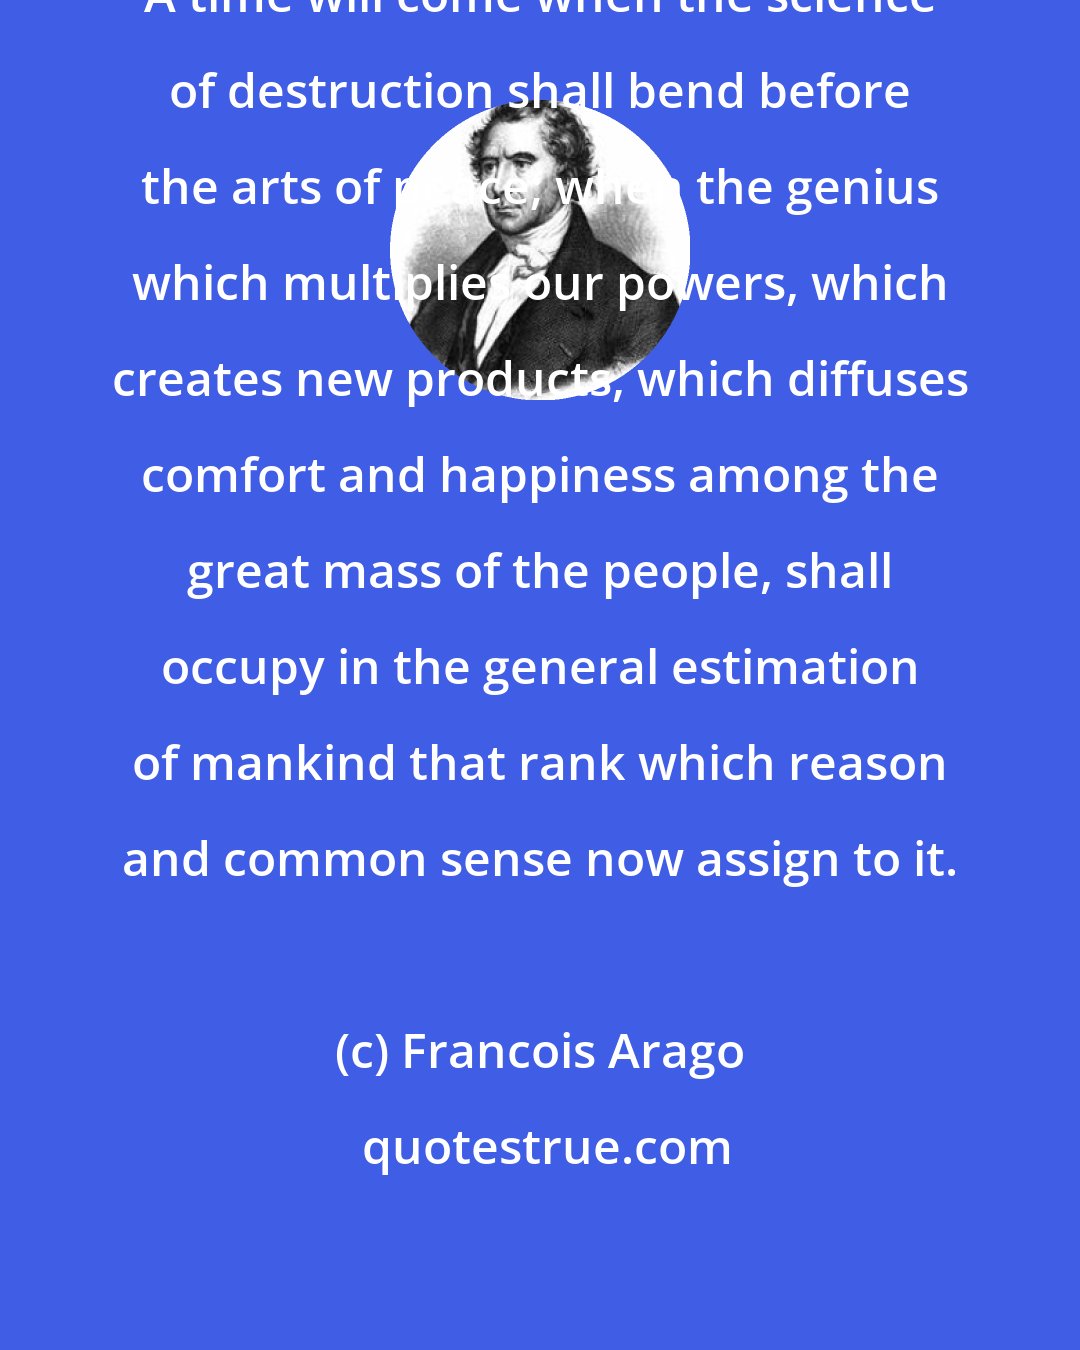 Francois Arago: A time will come when the science of destruction shall bend before the arts of peace; when the genius which multiplies our powers, which creates new products, which diffuses comfort and happiness among the great mass of the people, shall occupy in the general estimation of mankind that rank which reason and common sense now assign to it.